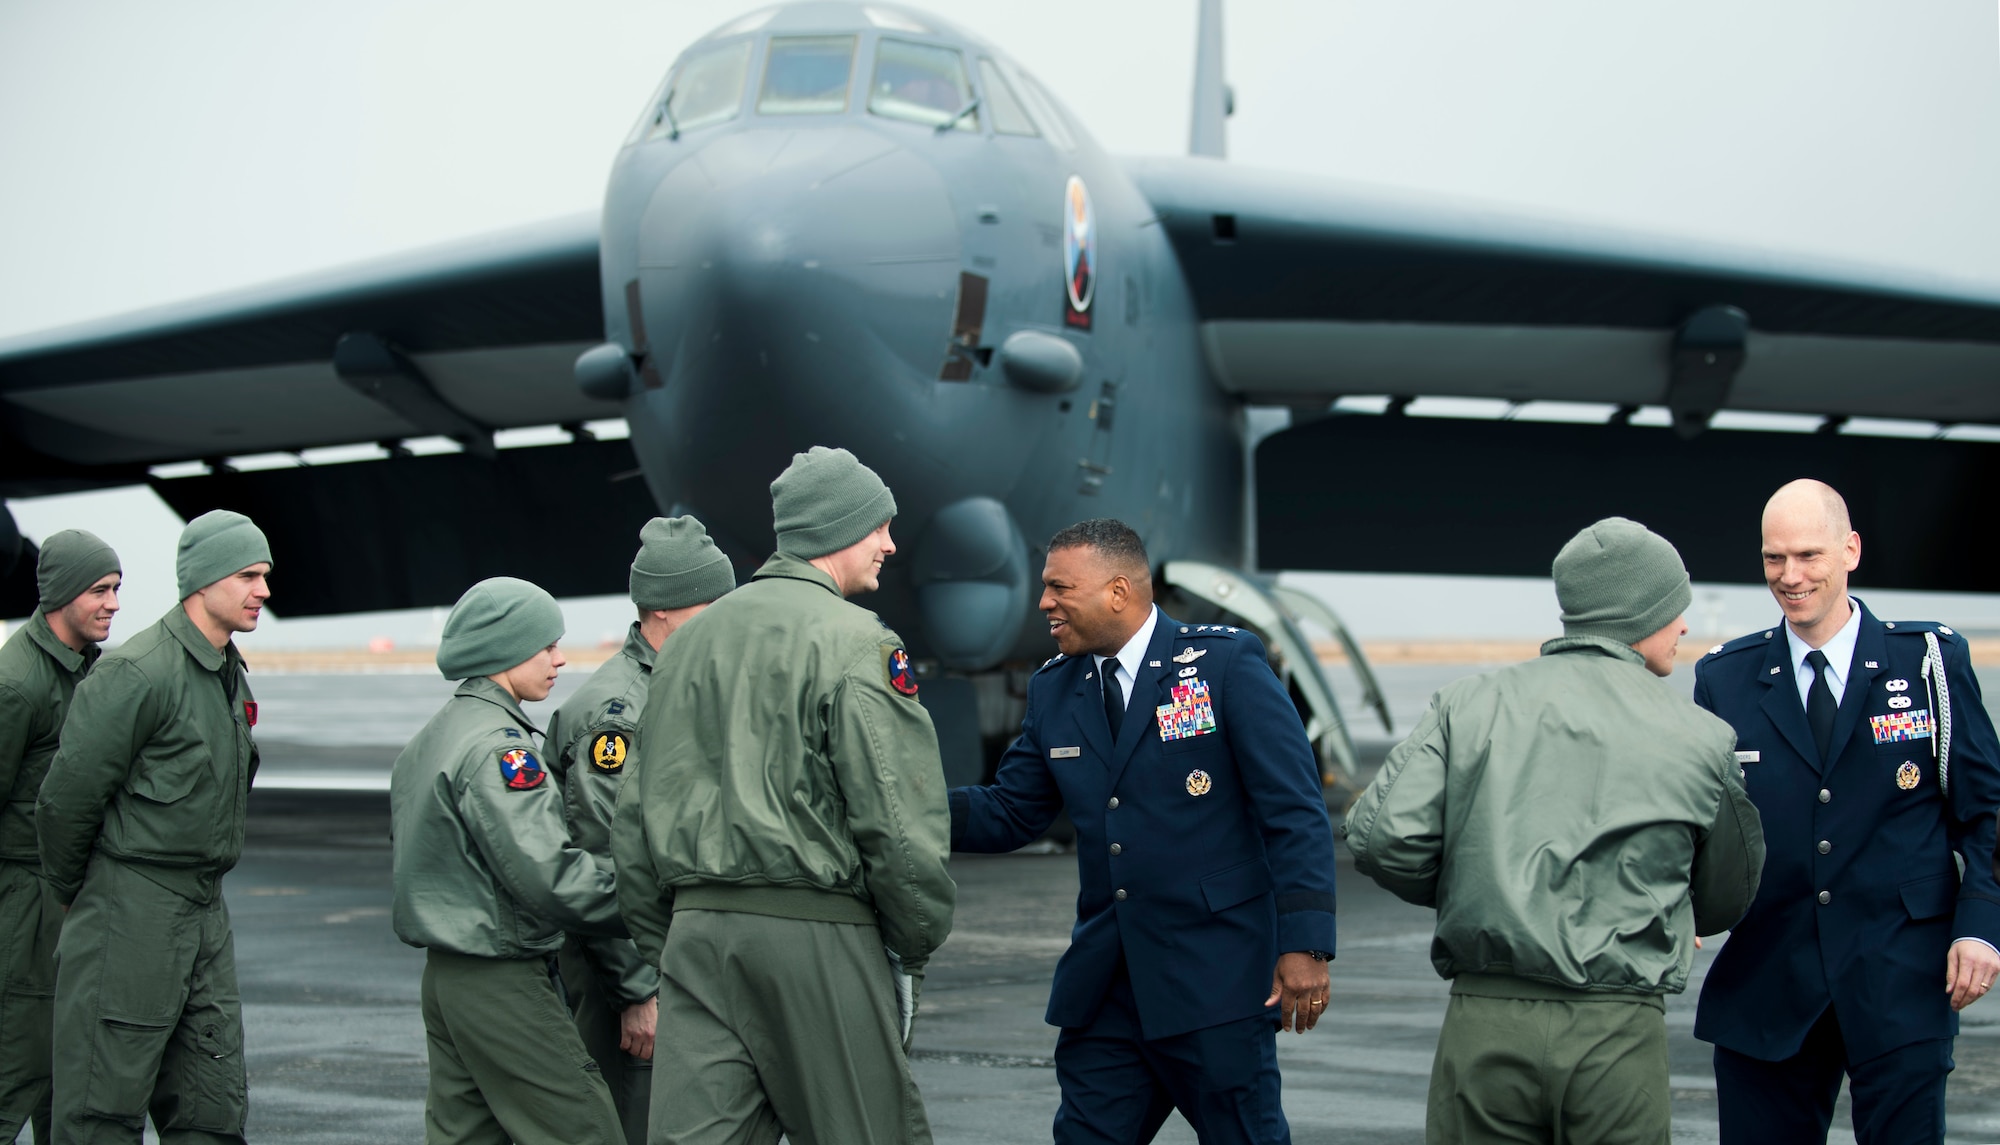 Lt. Gen. Richard Clark, 3rd Air Force commander, welcomes the crew of a United State Air Force B-52 Stratofortress, deployed from Minot Air Force Base, N.D., after a ceremonial flyover for a monument dedication to honor the crew of the B-24 Liberator “Hot Stuff” at Keflavic Air Station, Iceland, May 3, 2018.  As the “gateway to the Arctic,” Iceland serves as an important transit point to over 1,000 U.S., NATO military and government aircraft each year traveling between Europe and North America. (U.S. Navy photo by MC3 Evan Parker)